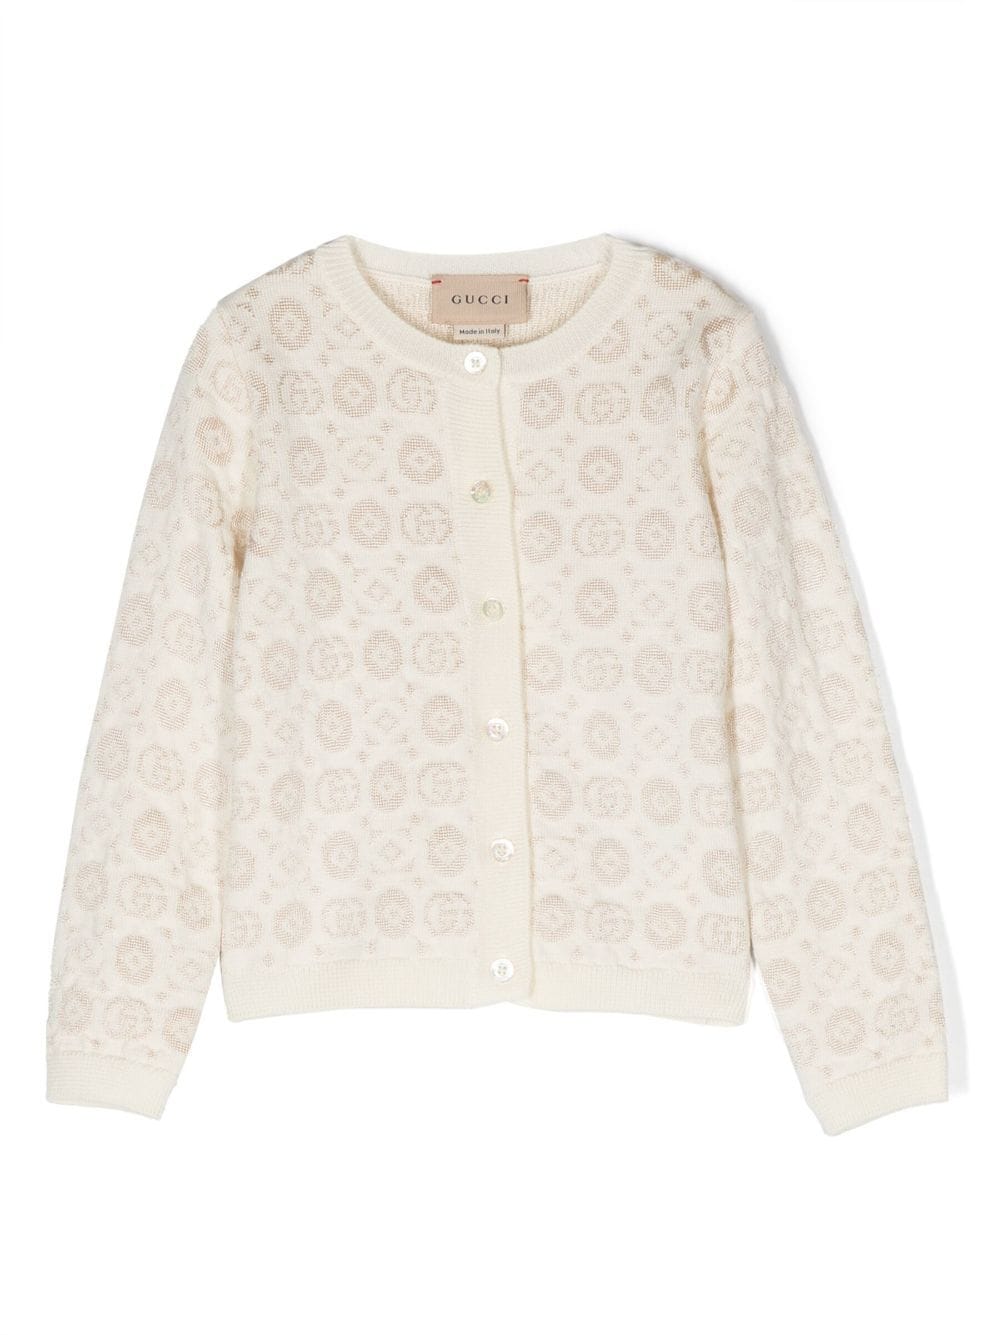 Image 1 of Gucci Kids Double-G wool cardigan